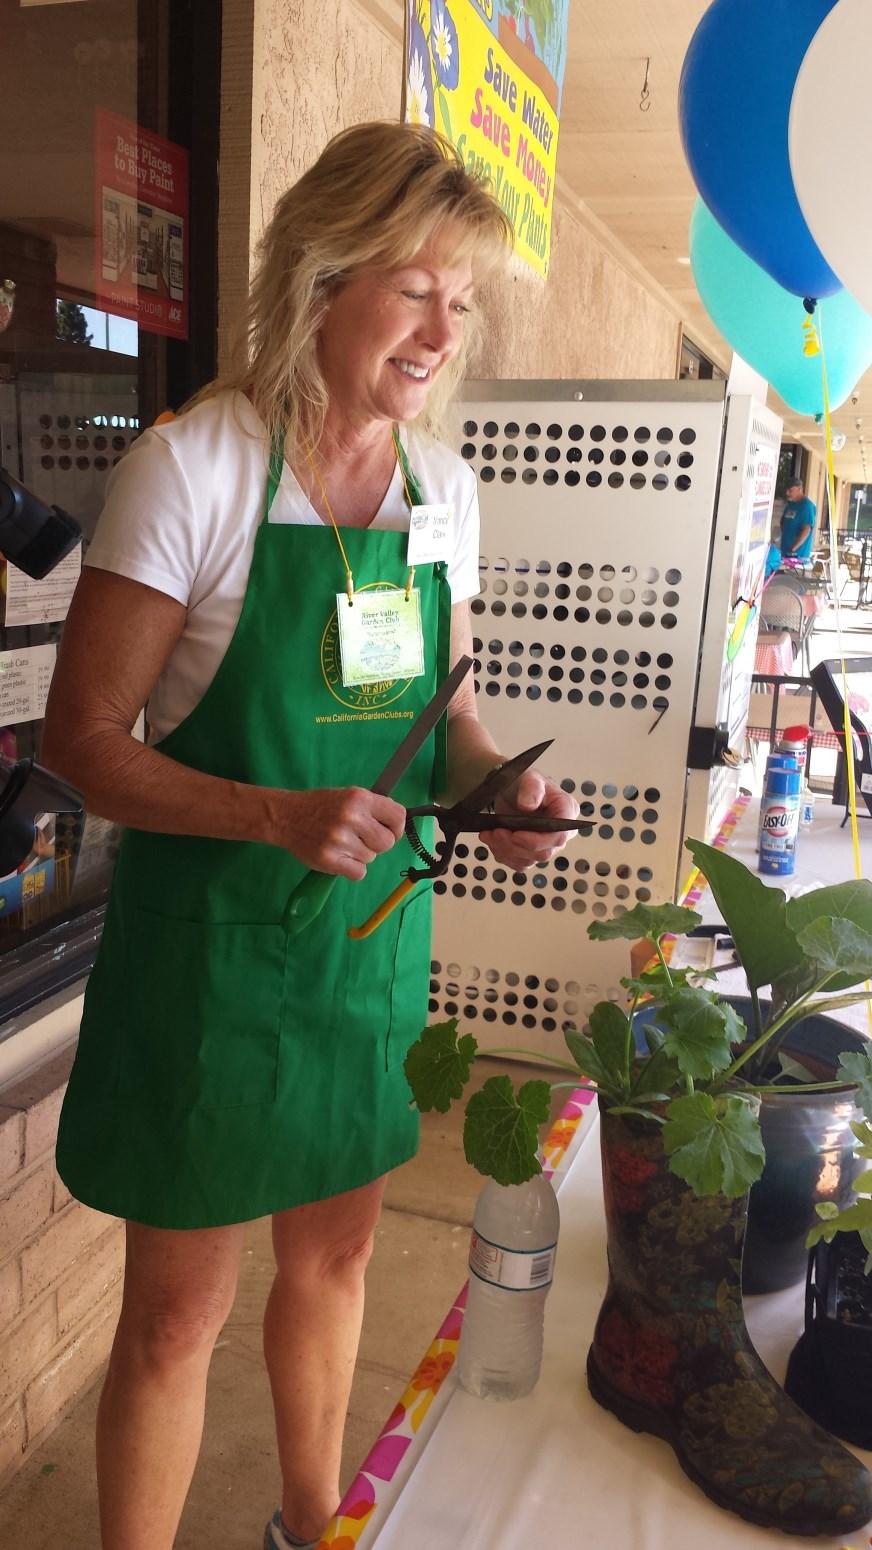 (Did you see the great article about this event in the June 6th River Valley Times on page 11!?) The children s gardening kits were the brainchild of the California Garden Club, Inc. (CGCI) President.